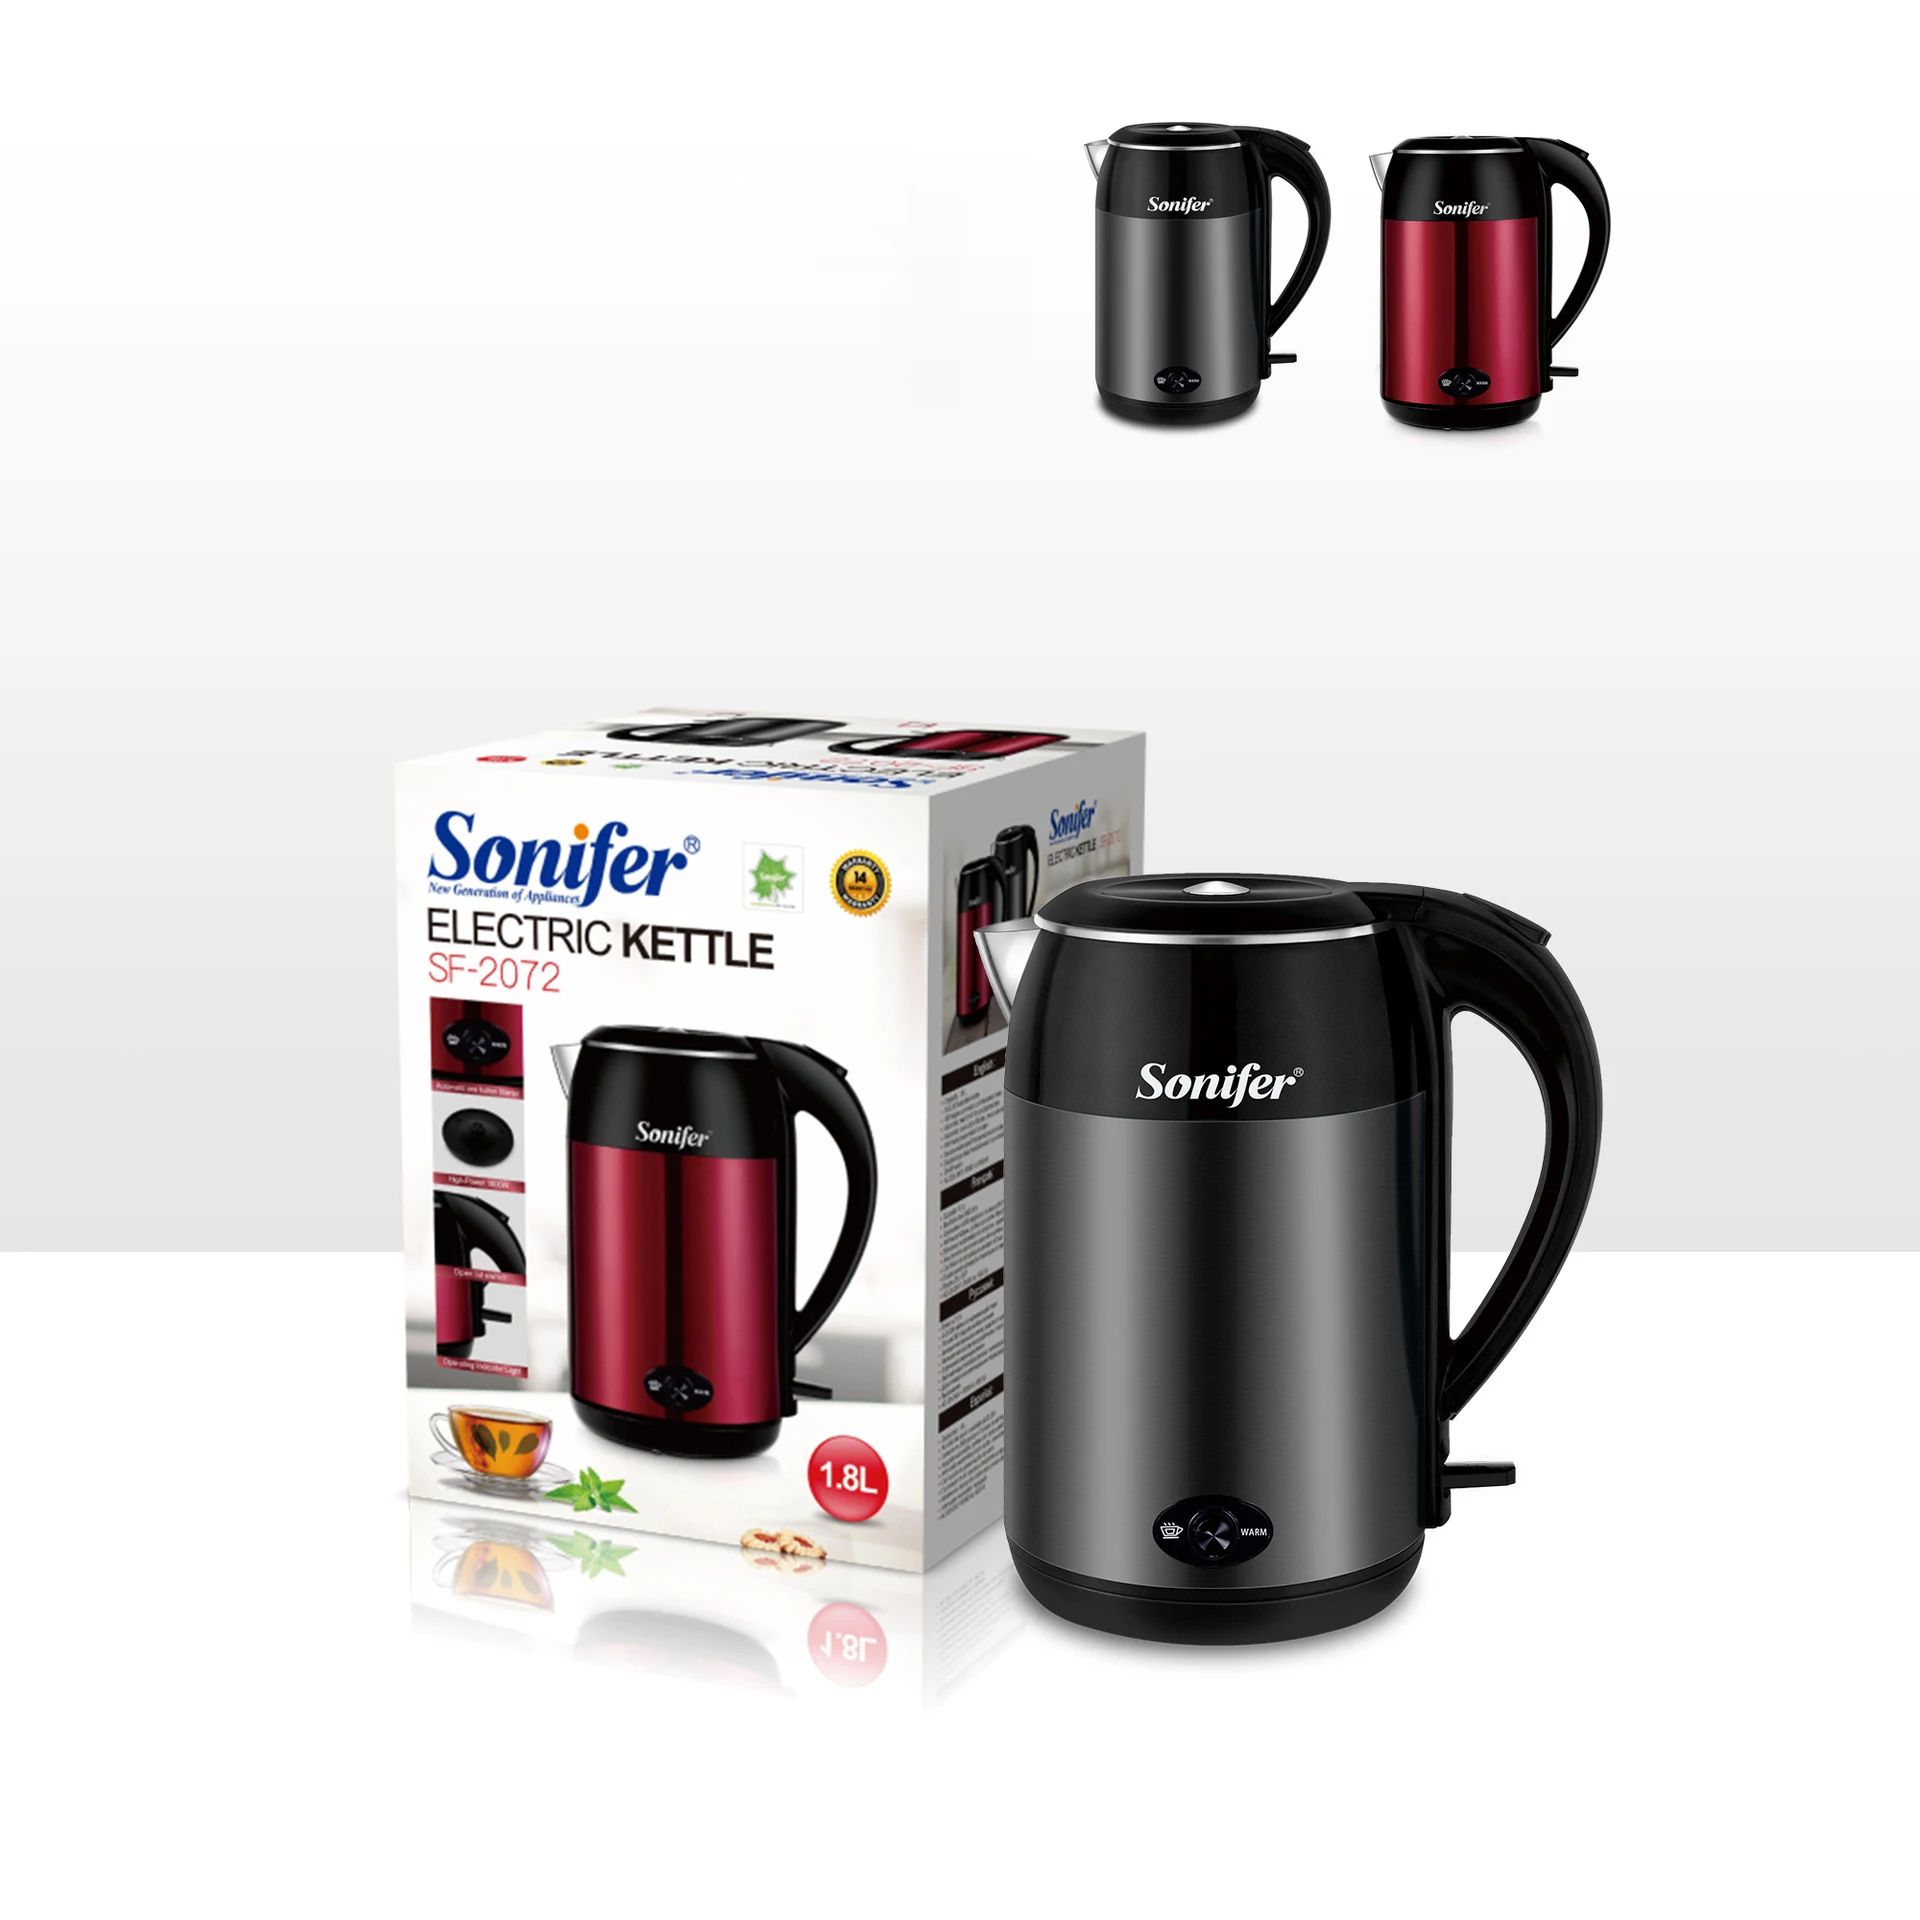 

SF-2072 Household Electric Kettle 1.8L Capacity Stainless Steel 1800W Strong Power Multifunction Kettle